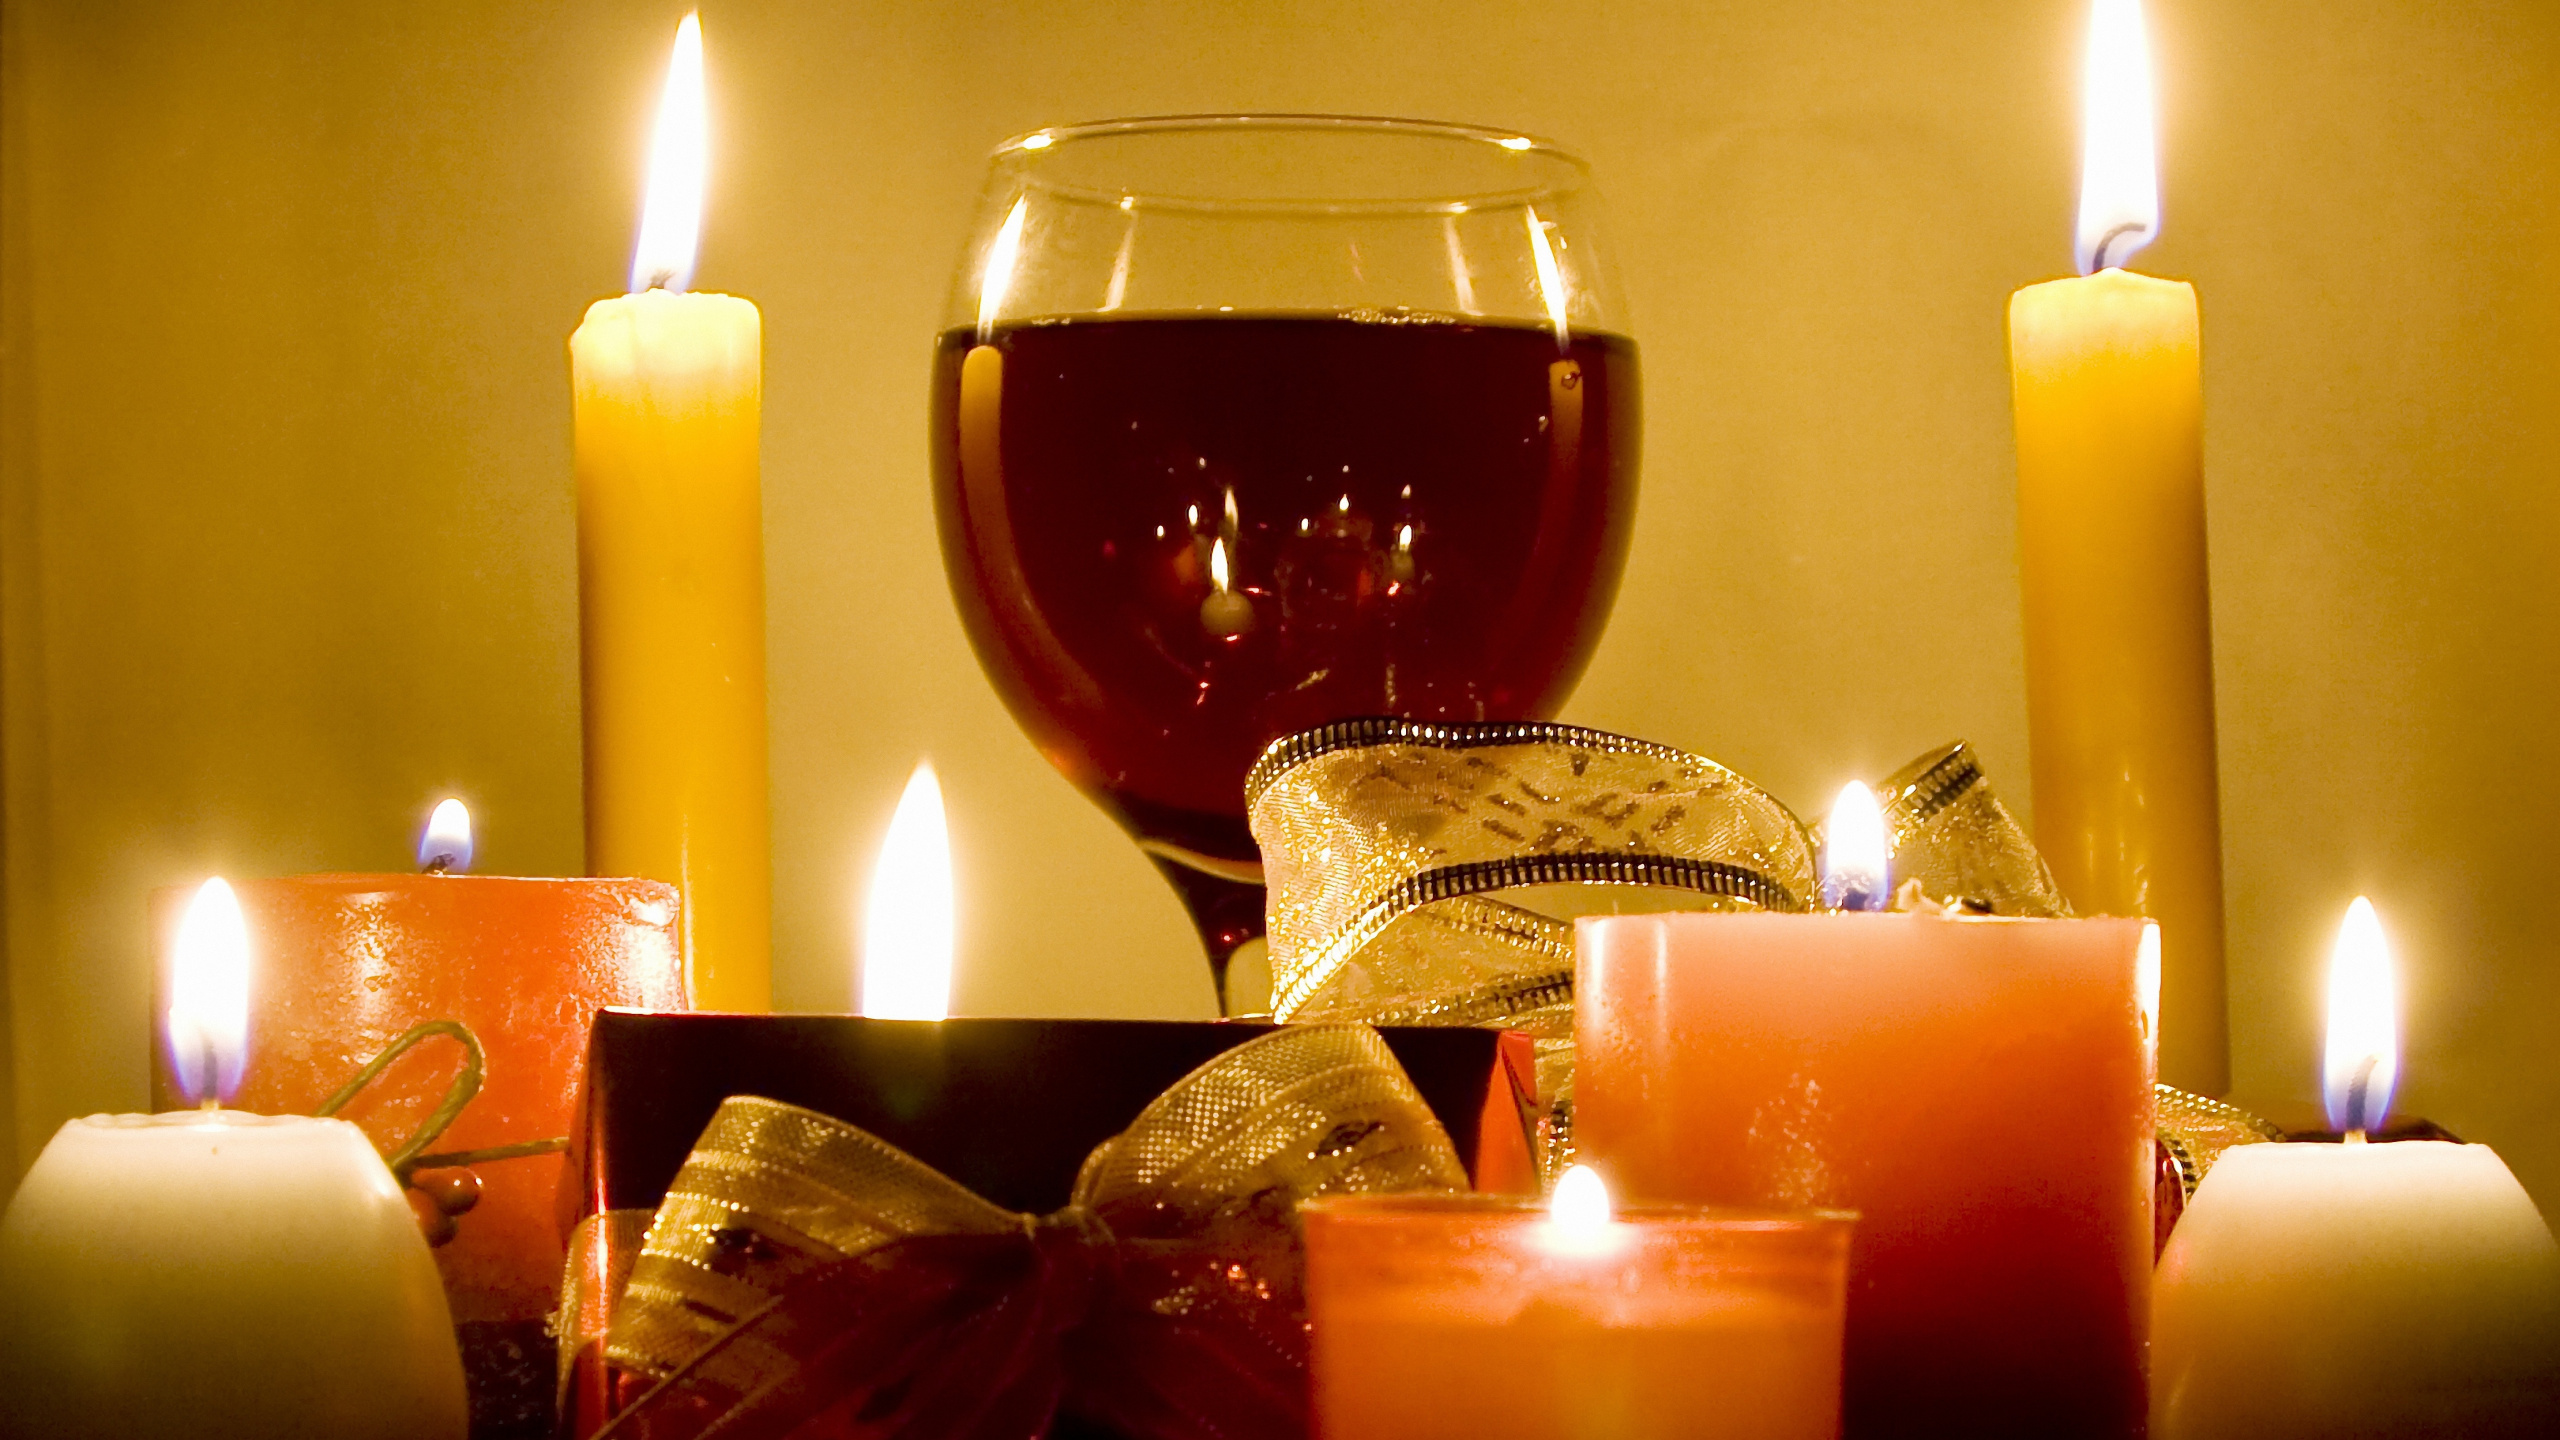 Wine, Candle, Lighting, Wax, Still Life. Wallpaper in 2560x1440 Resolution